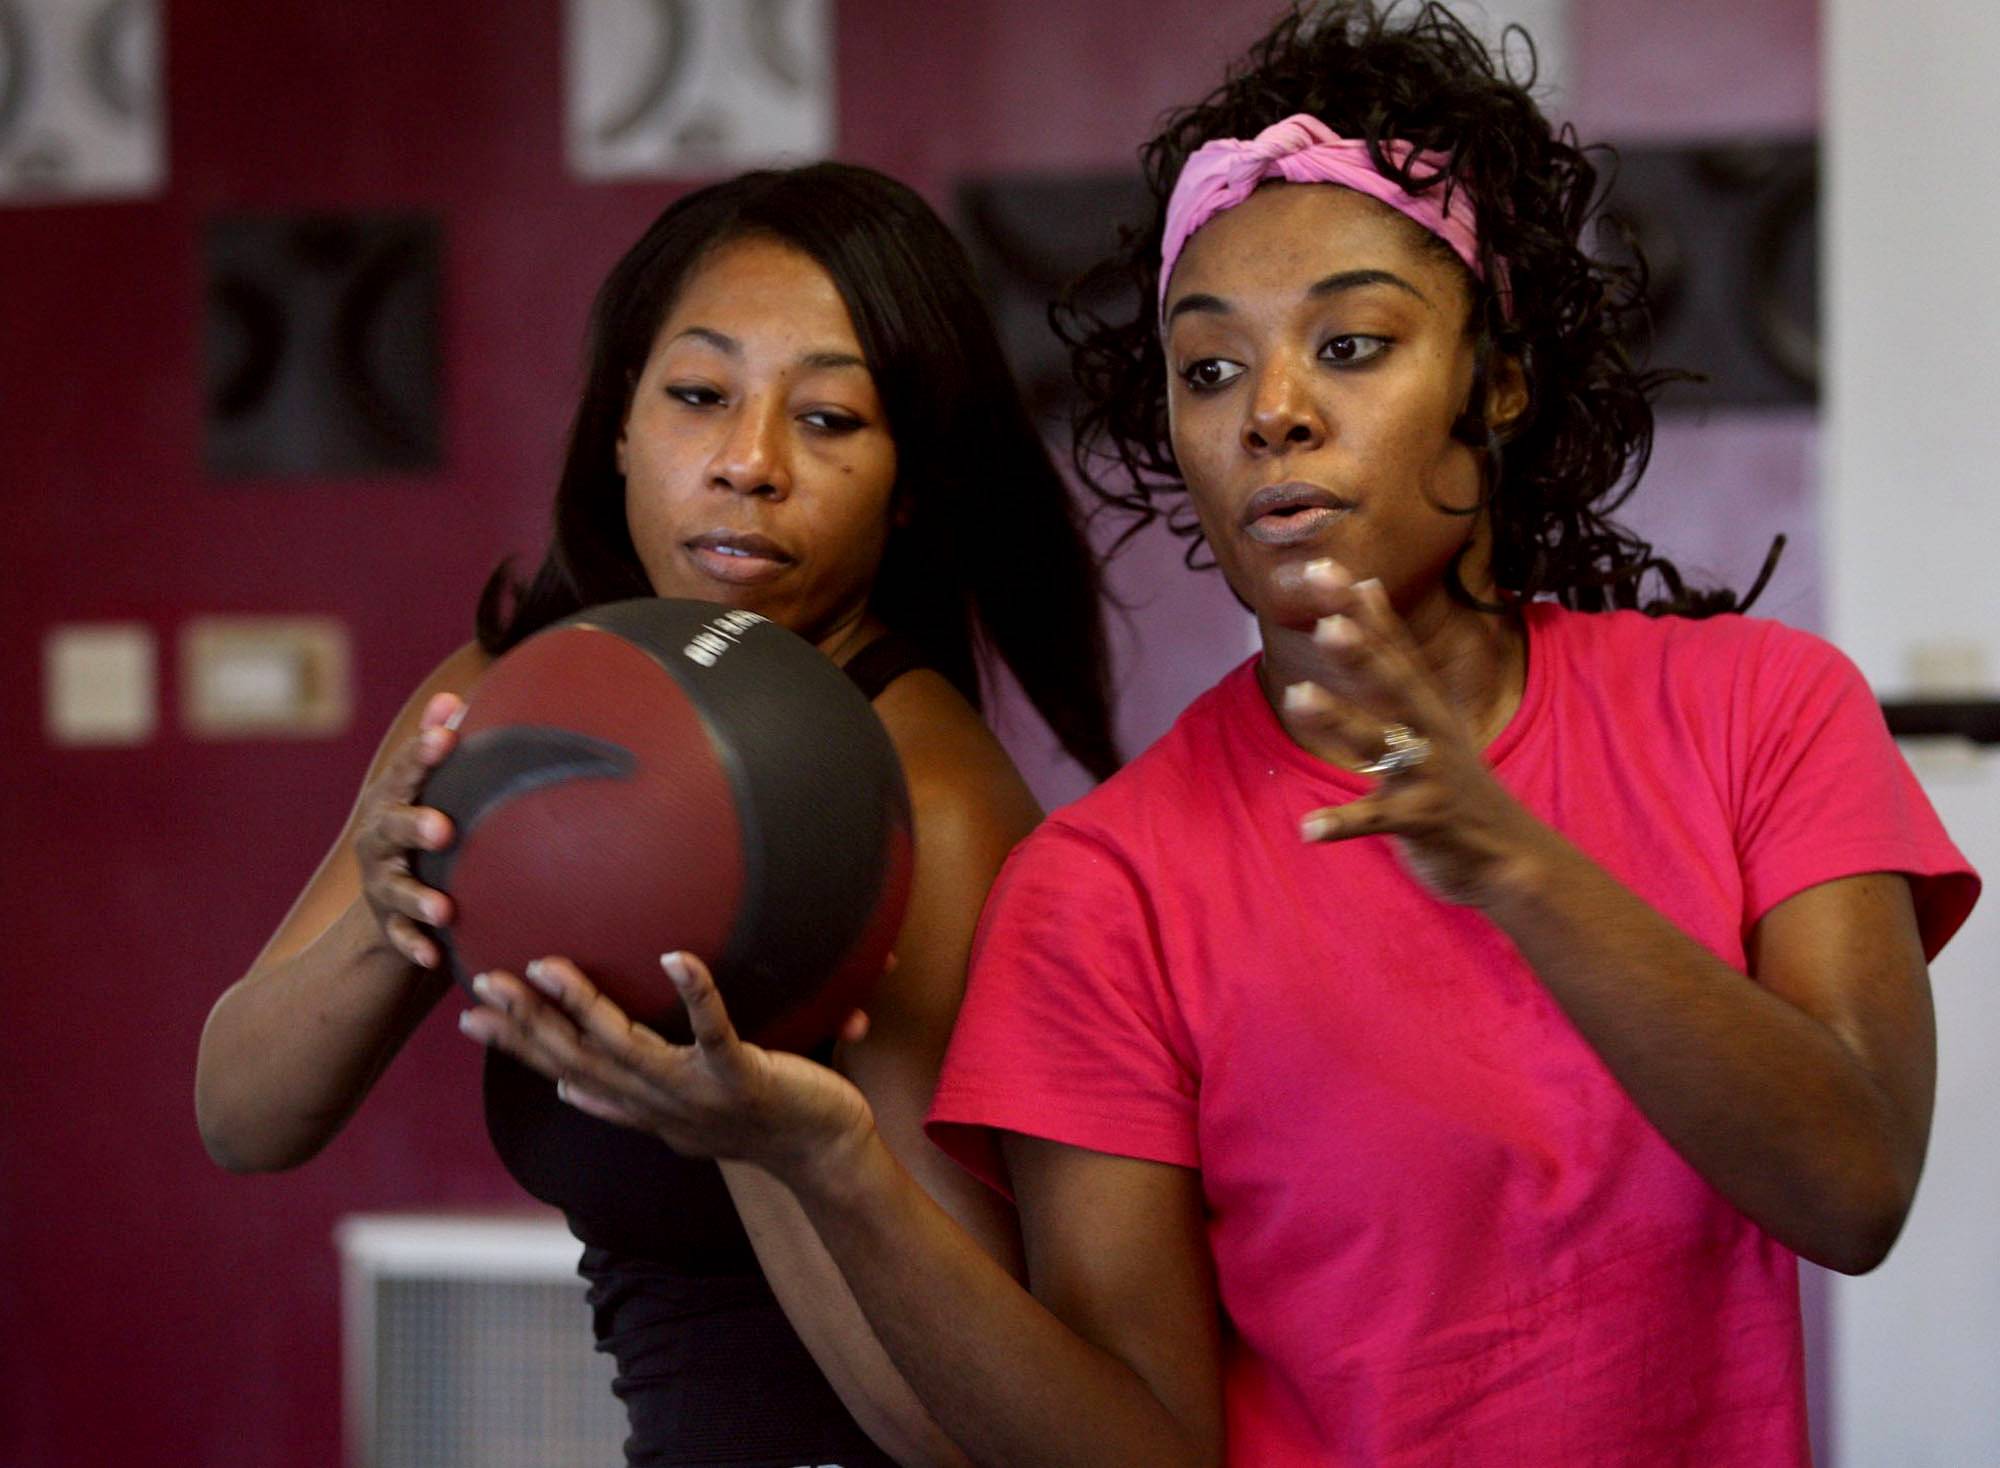 Study Finds African-American Girls Exercise Less Than Whites - A new study from the New England Journal of Medicine finds that Black adolescent girls exercise less than whites and also have a higher body-mass index—the measure of body fat based on height and weight. In the study, researchers linked less physical activity to higher rates of pregnancy among Black girls age 14 and older.(Photo: St. Louis Post-Dispatch/MCT/Landov)